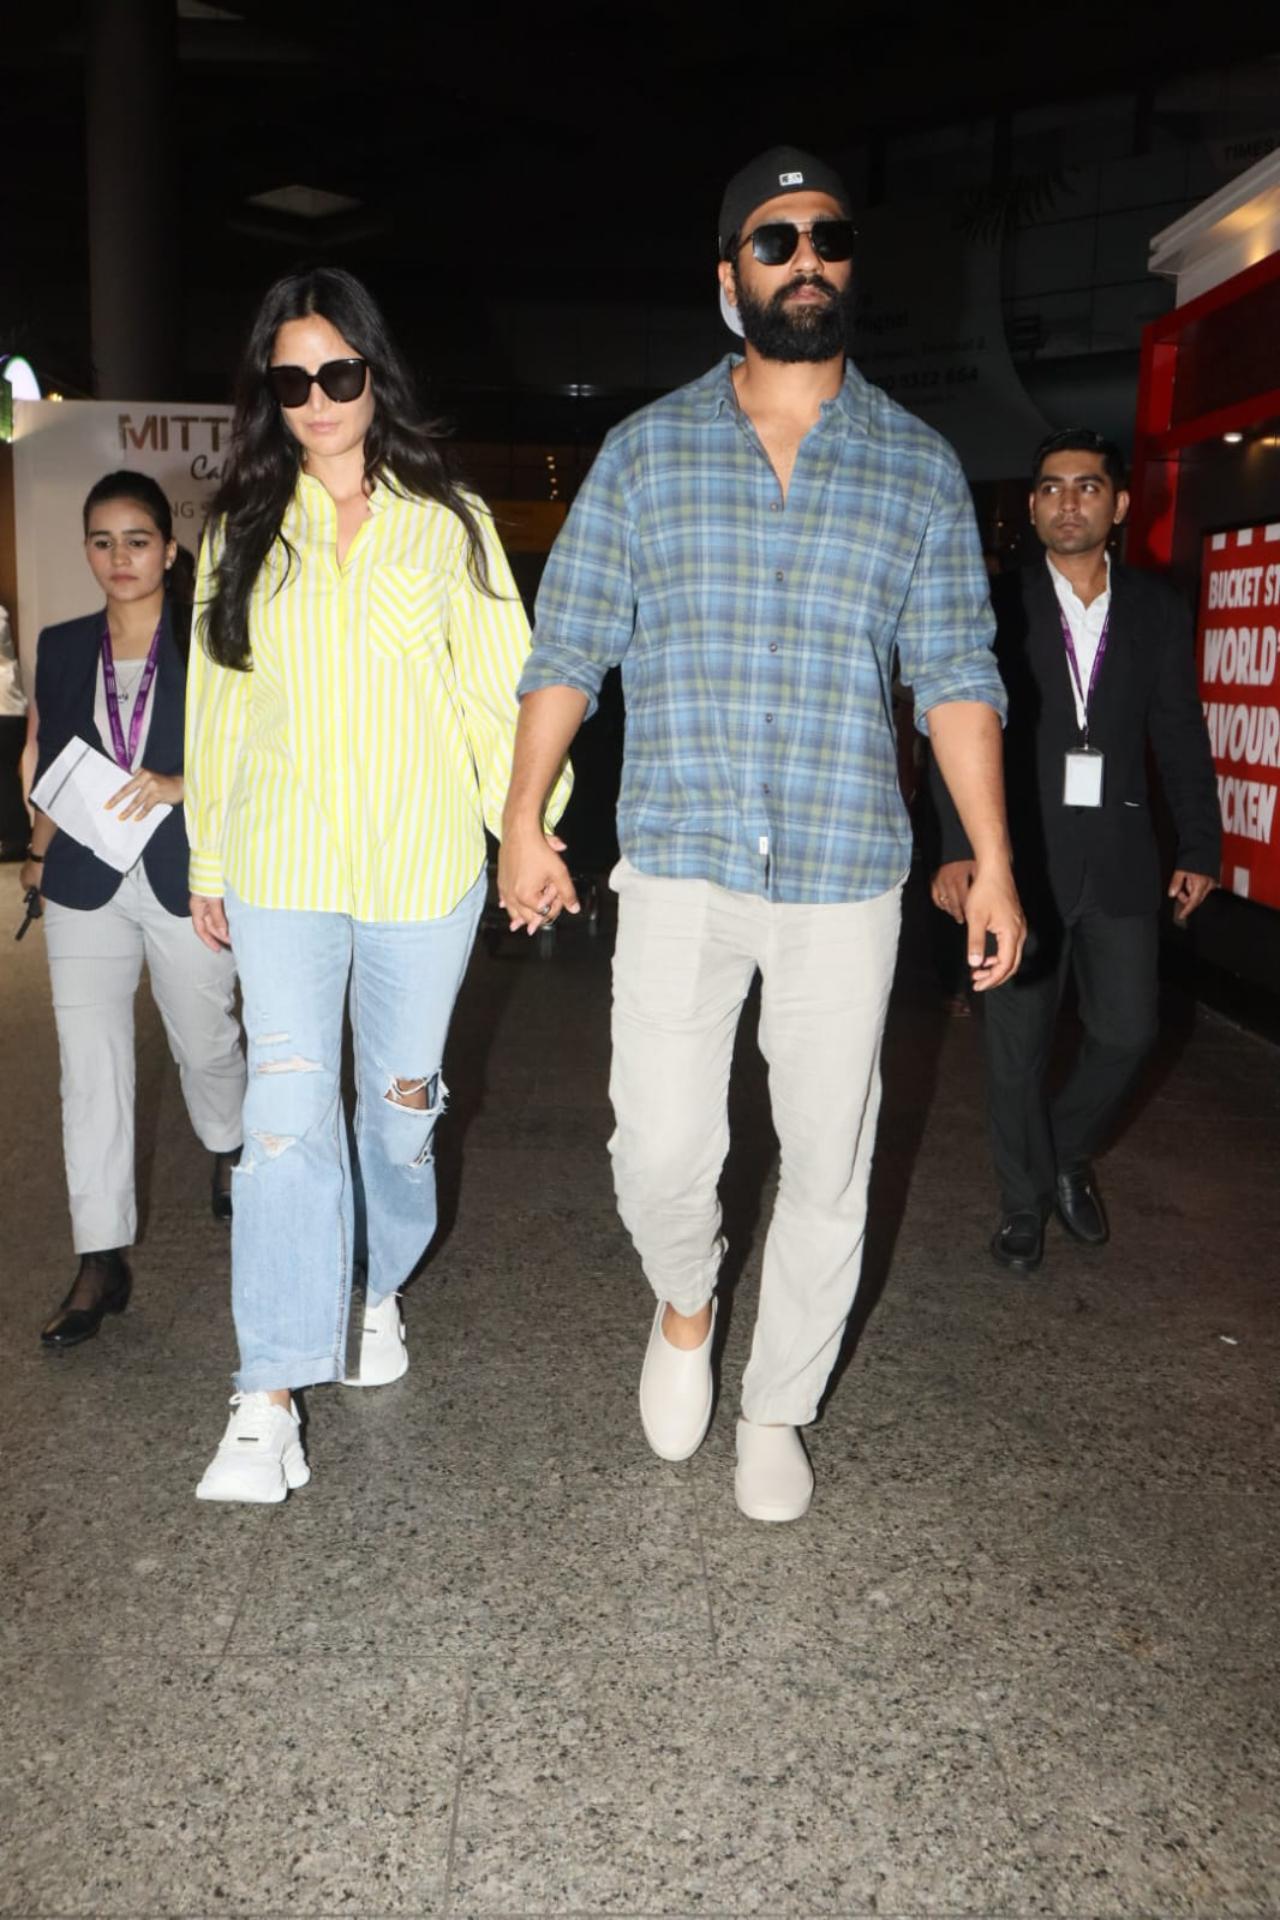 Katrina Kaif was snapped at the airport as she returned to the Bay with her husband Vicky Kaushal